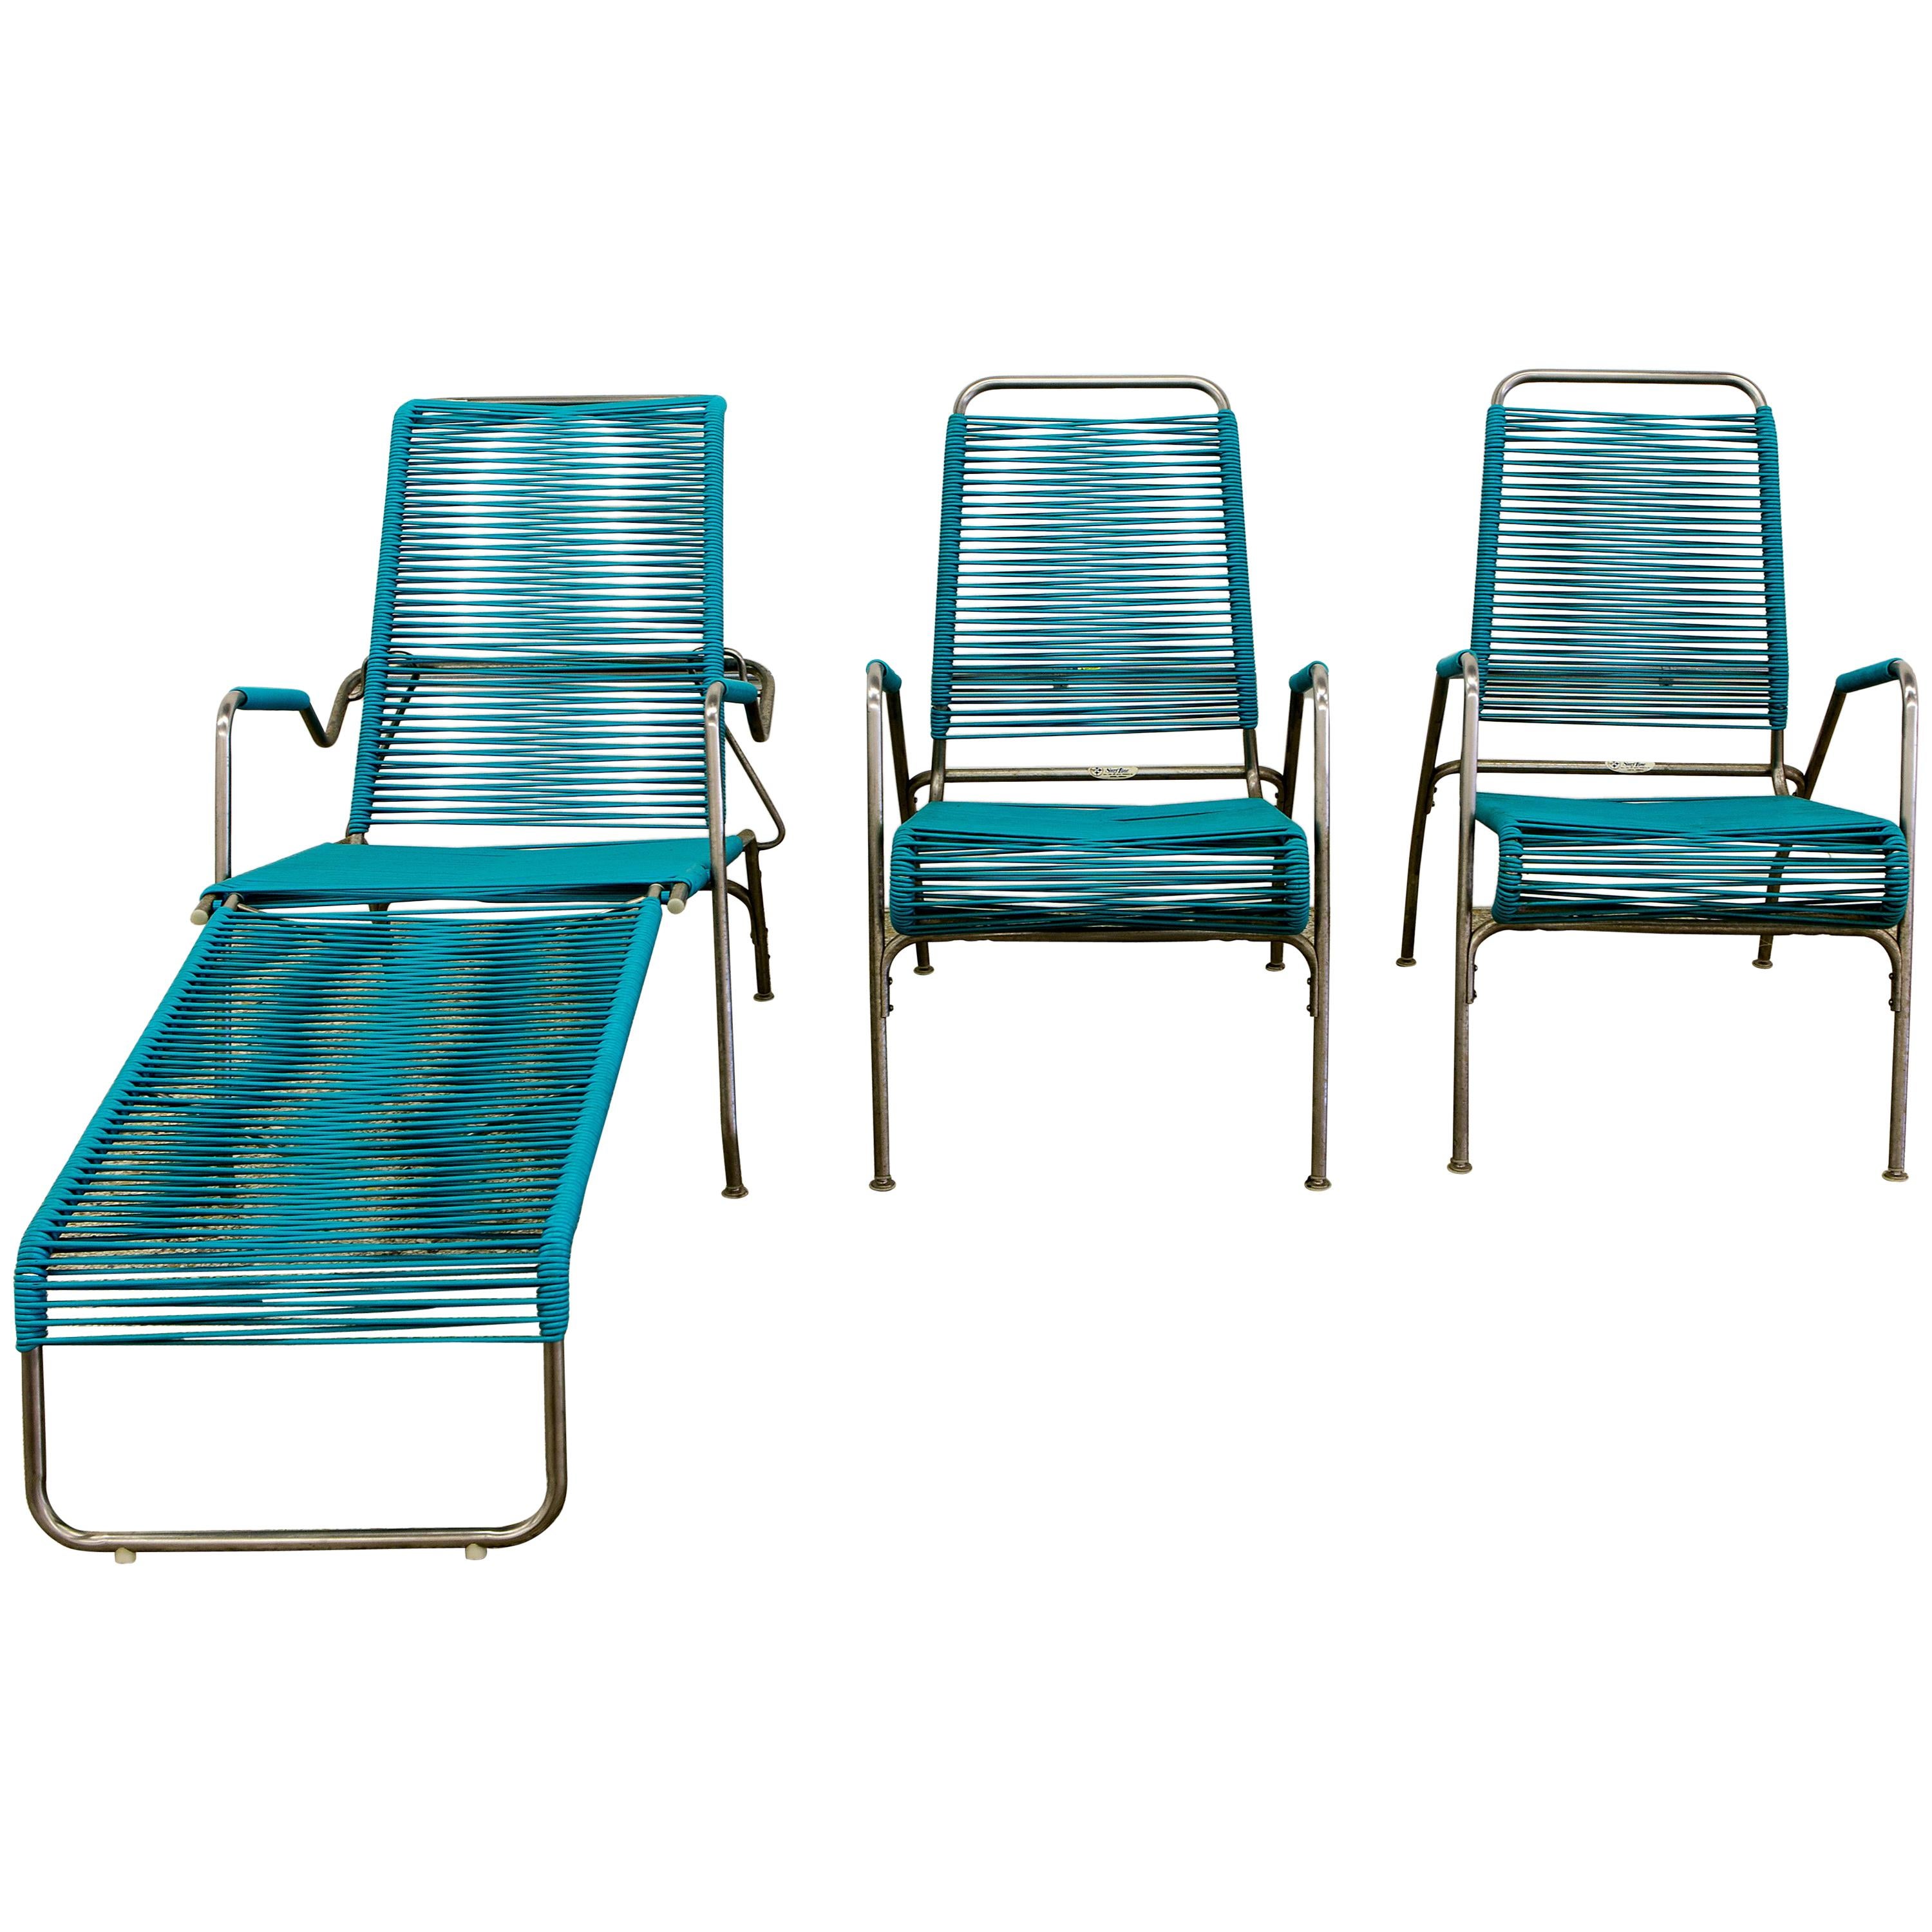 Patio Furniture by Surf Line, 2 Lounge Chairs, 1 Chaise in Stainless and Aqua 